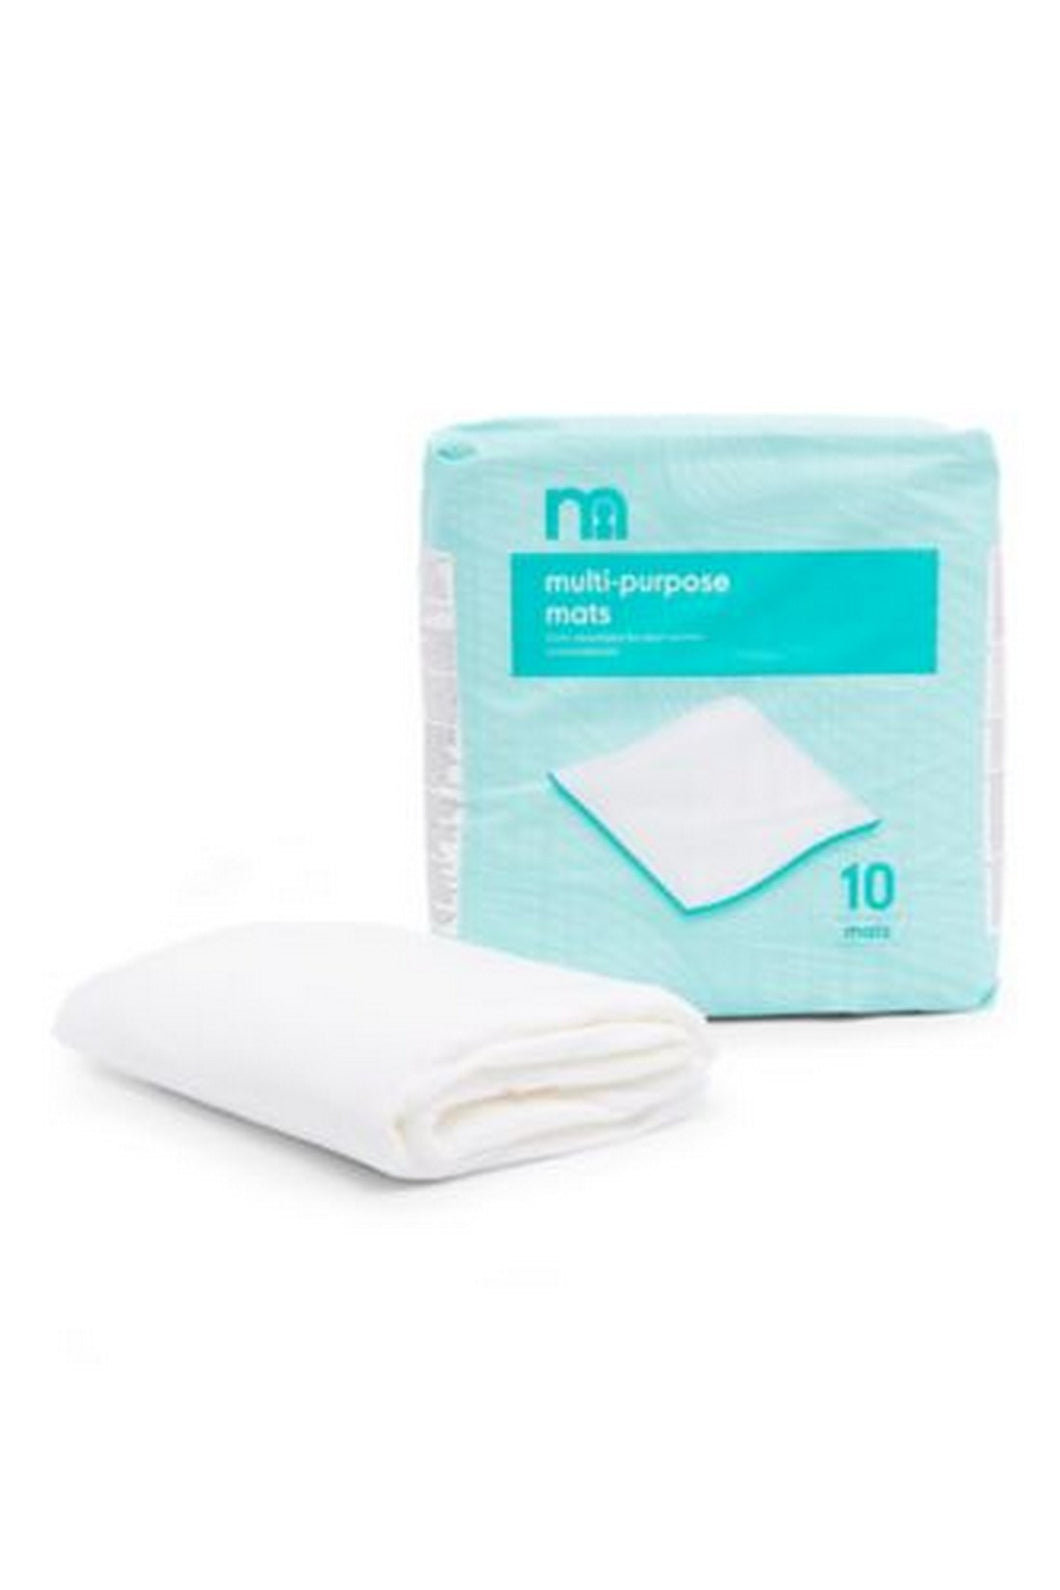 Mothercare Maternity Bed Mats 10 Pack 1